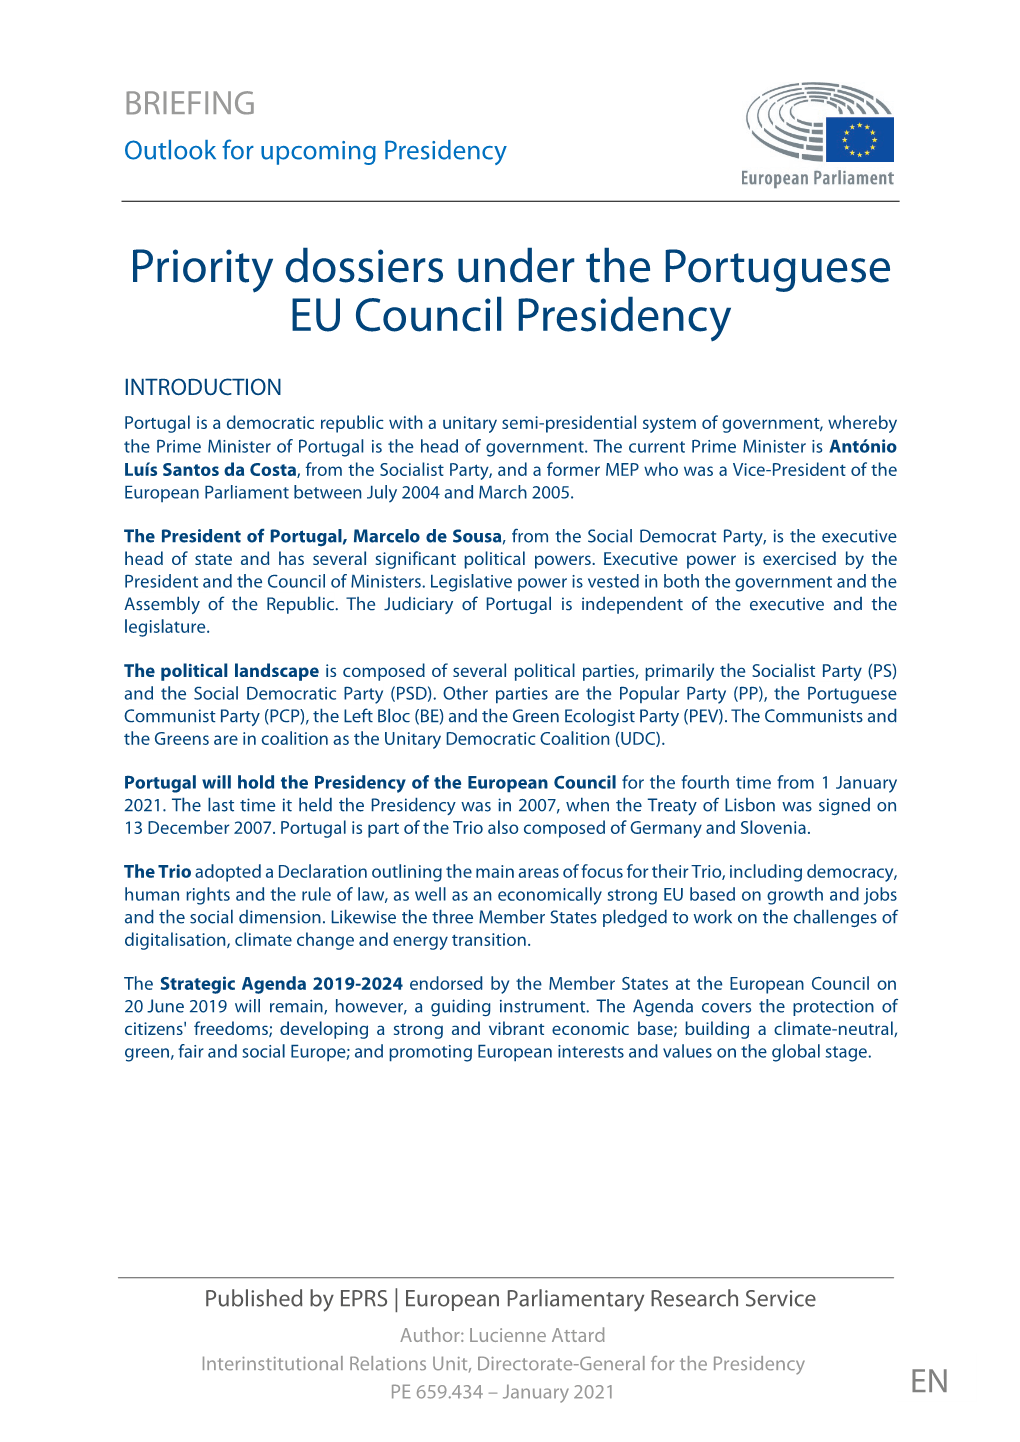 Priority Dossiers Under the Portuguese EU Council Presidency